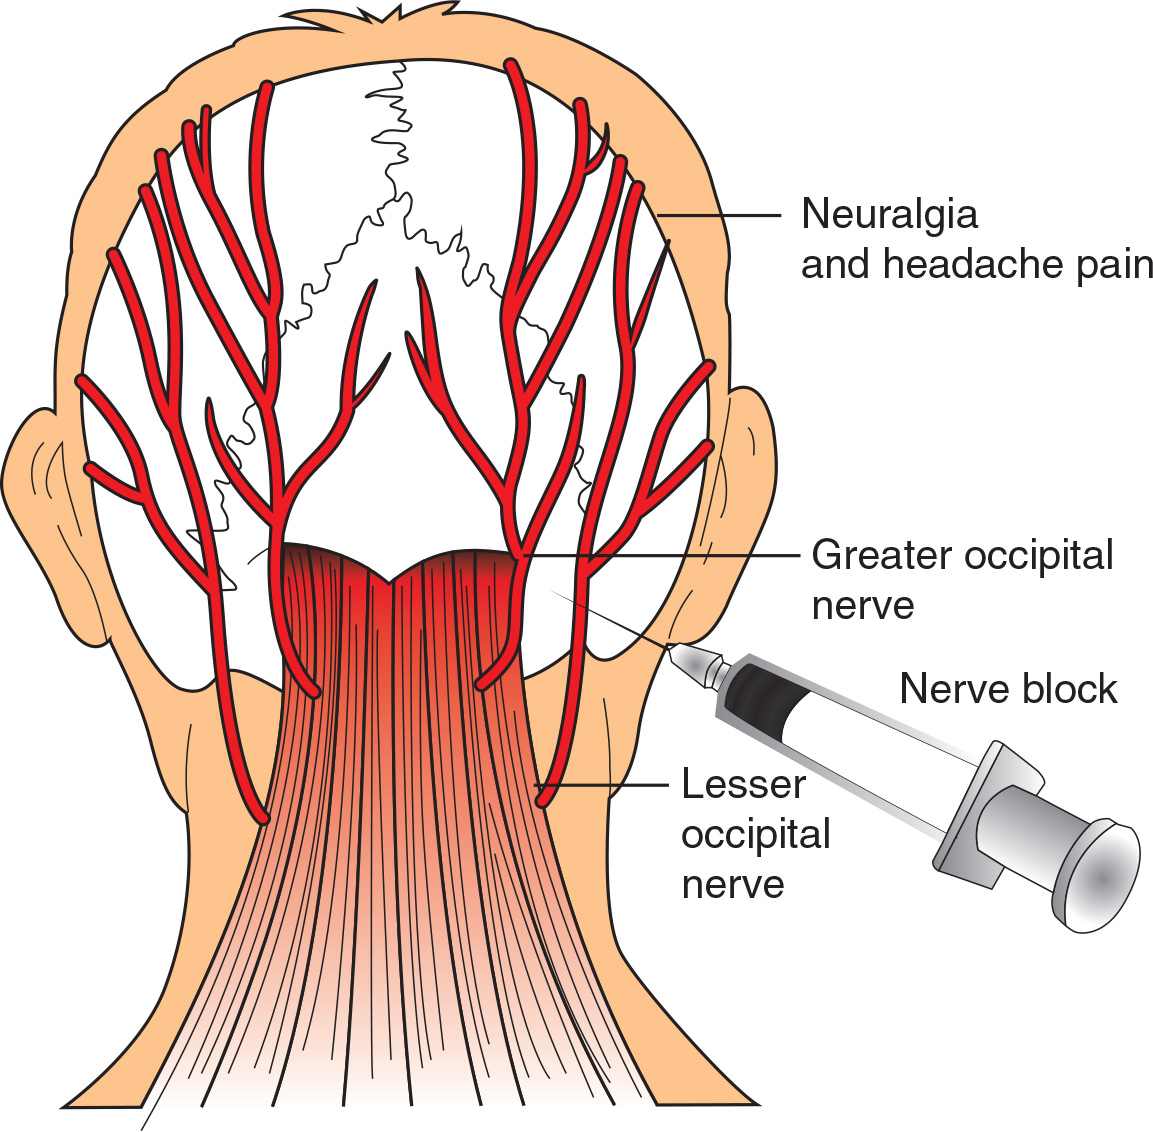 What happens if the occipital nerve is cut?